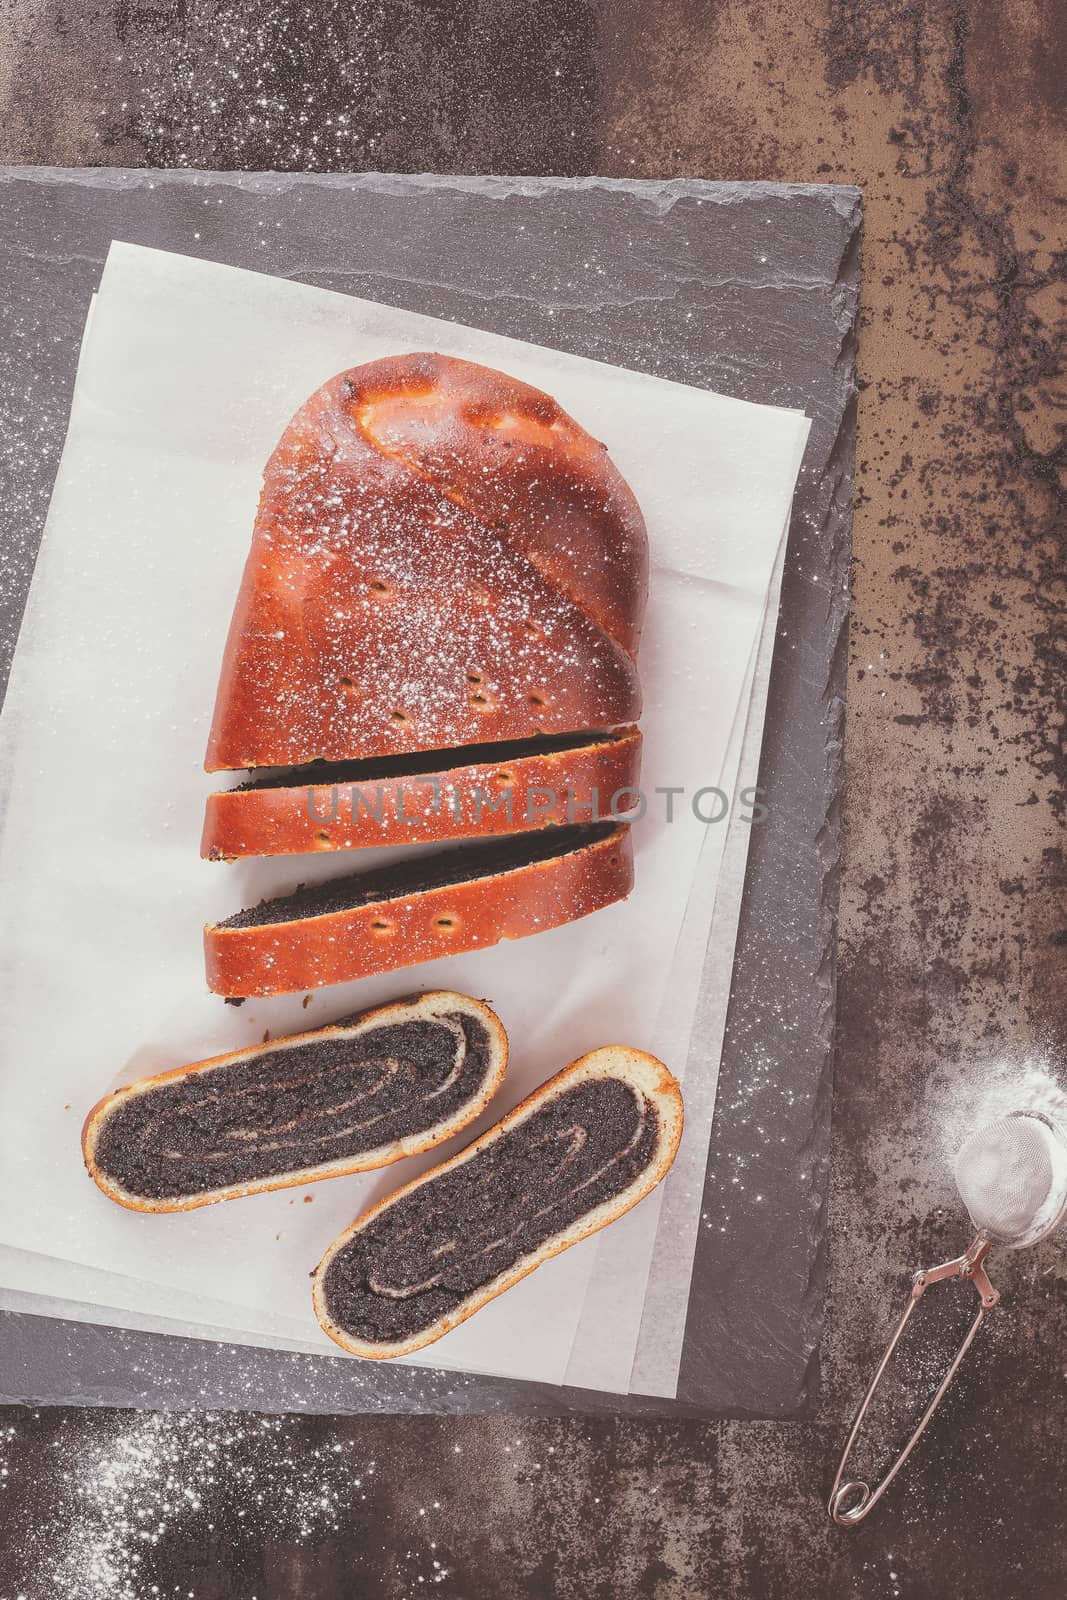 Poppy seed strudel, partly slices on vintage background. Overhead view with copy space. Natural light